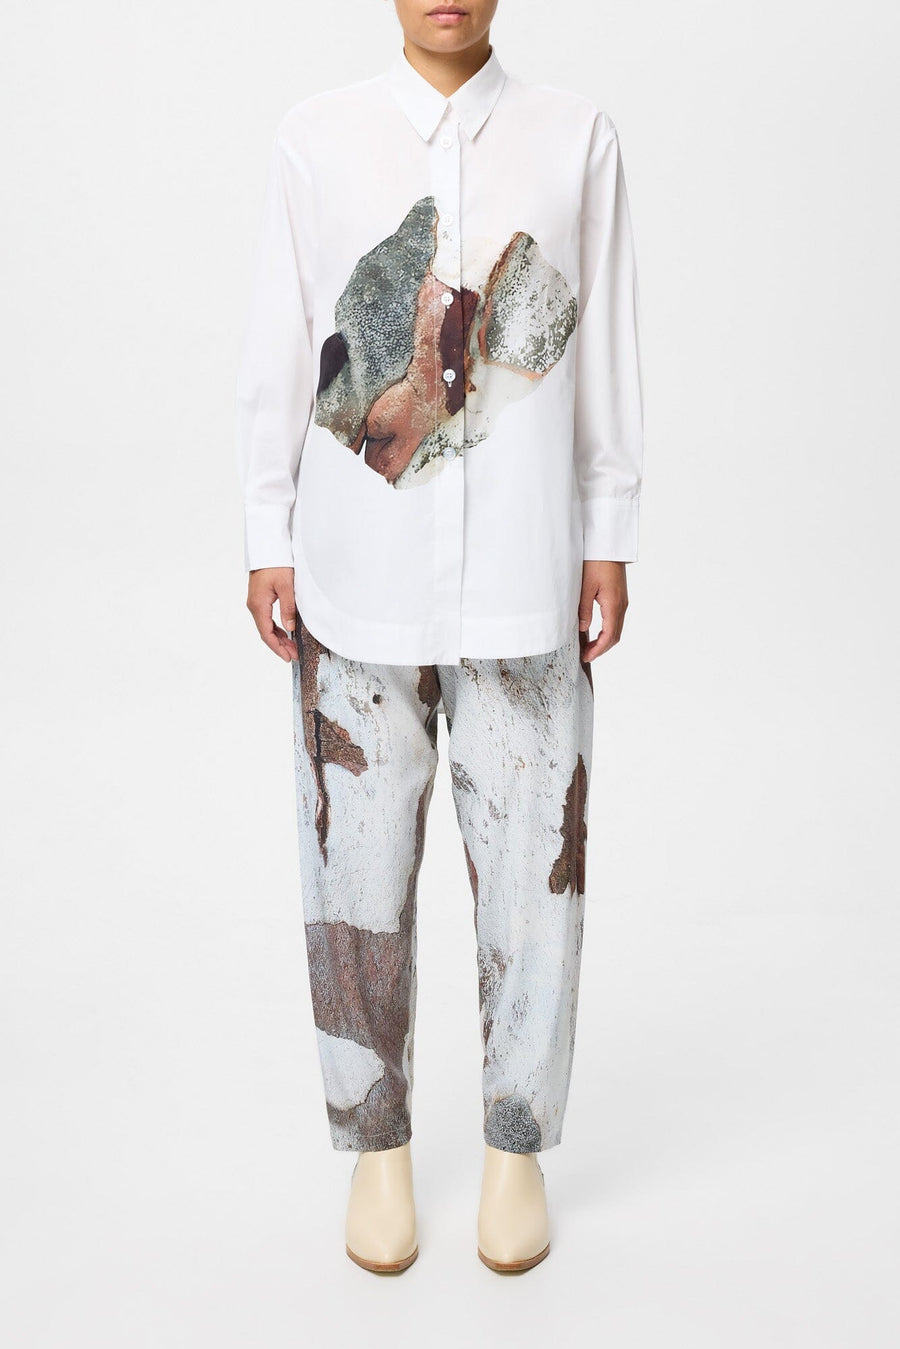 Placement Print Shirt - Late April Delivery